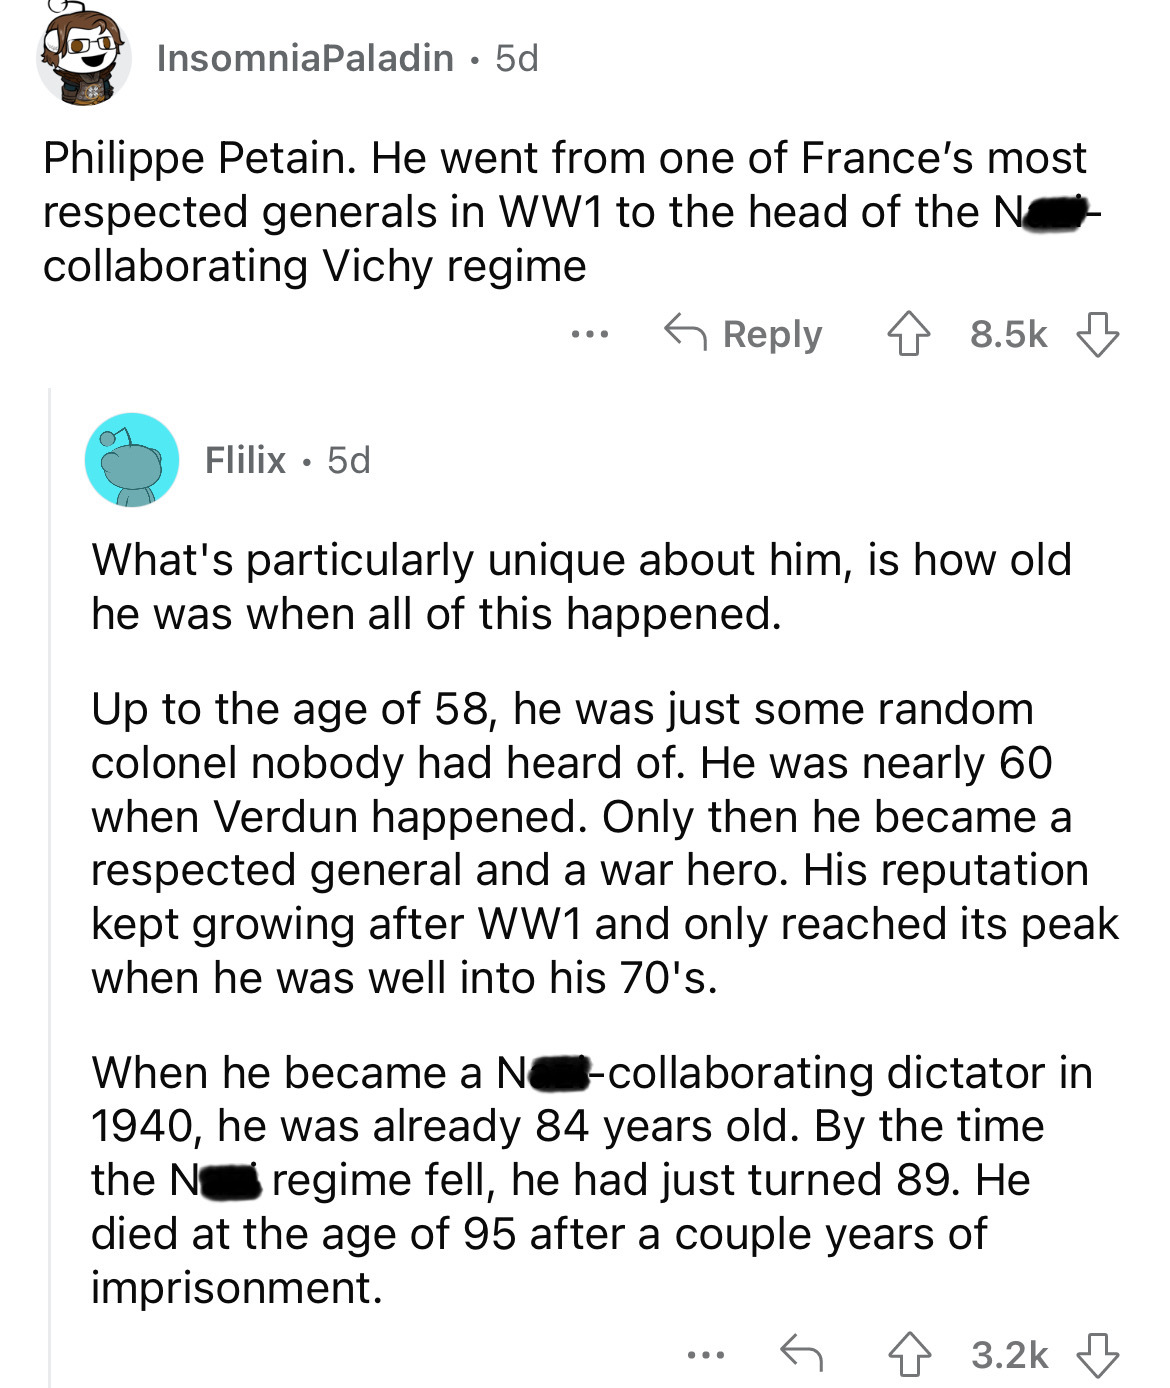 document - InsomniaPaladin 5d Philippe Petain. He went from one of France's most respected generals in WW1 to the head of the N collaborating Vichy regime Flilix. 5d ... What's particularly unique about him, is how old he was when all of this happened. Up